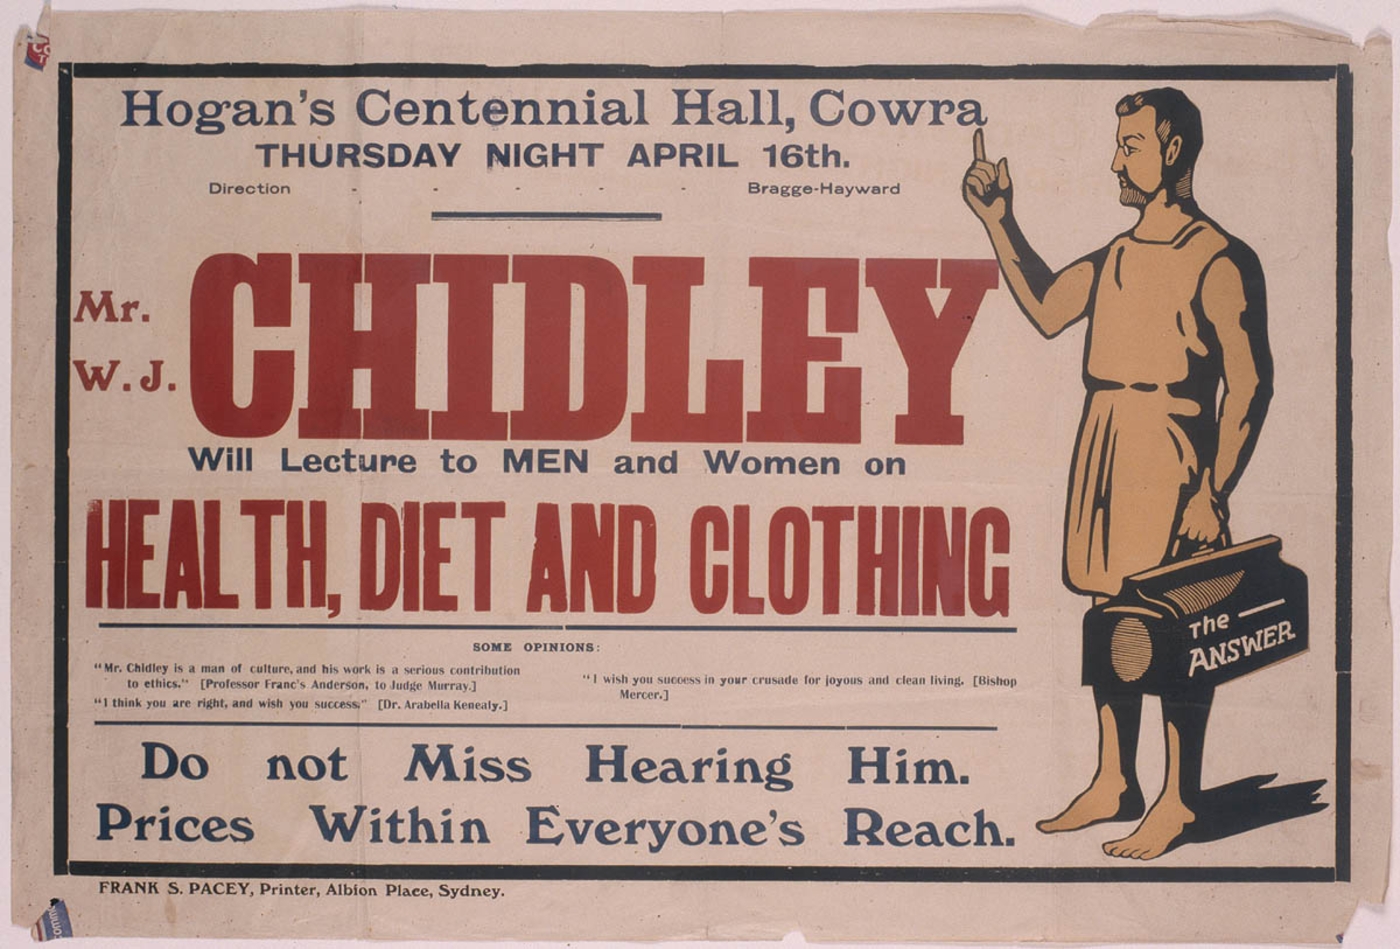 Pdf The Wroeites, William Chidley And The British Medical Association